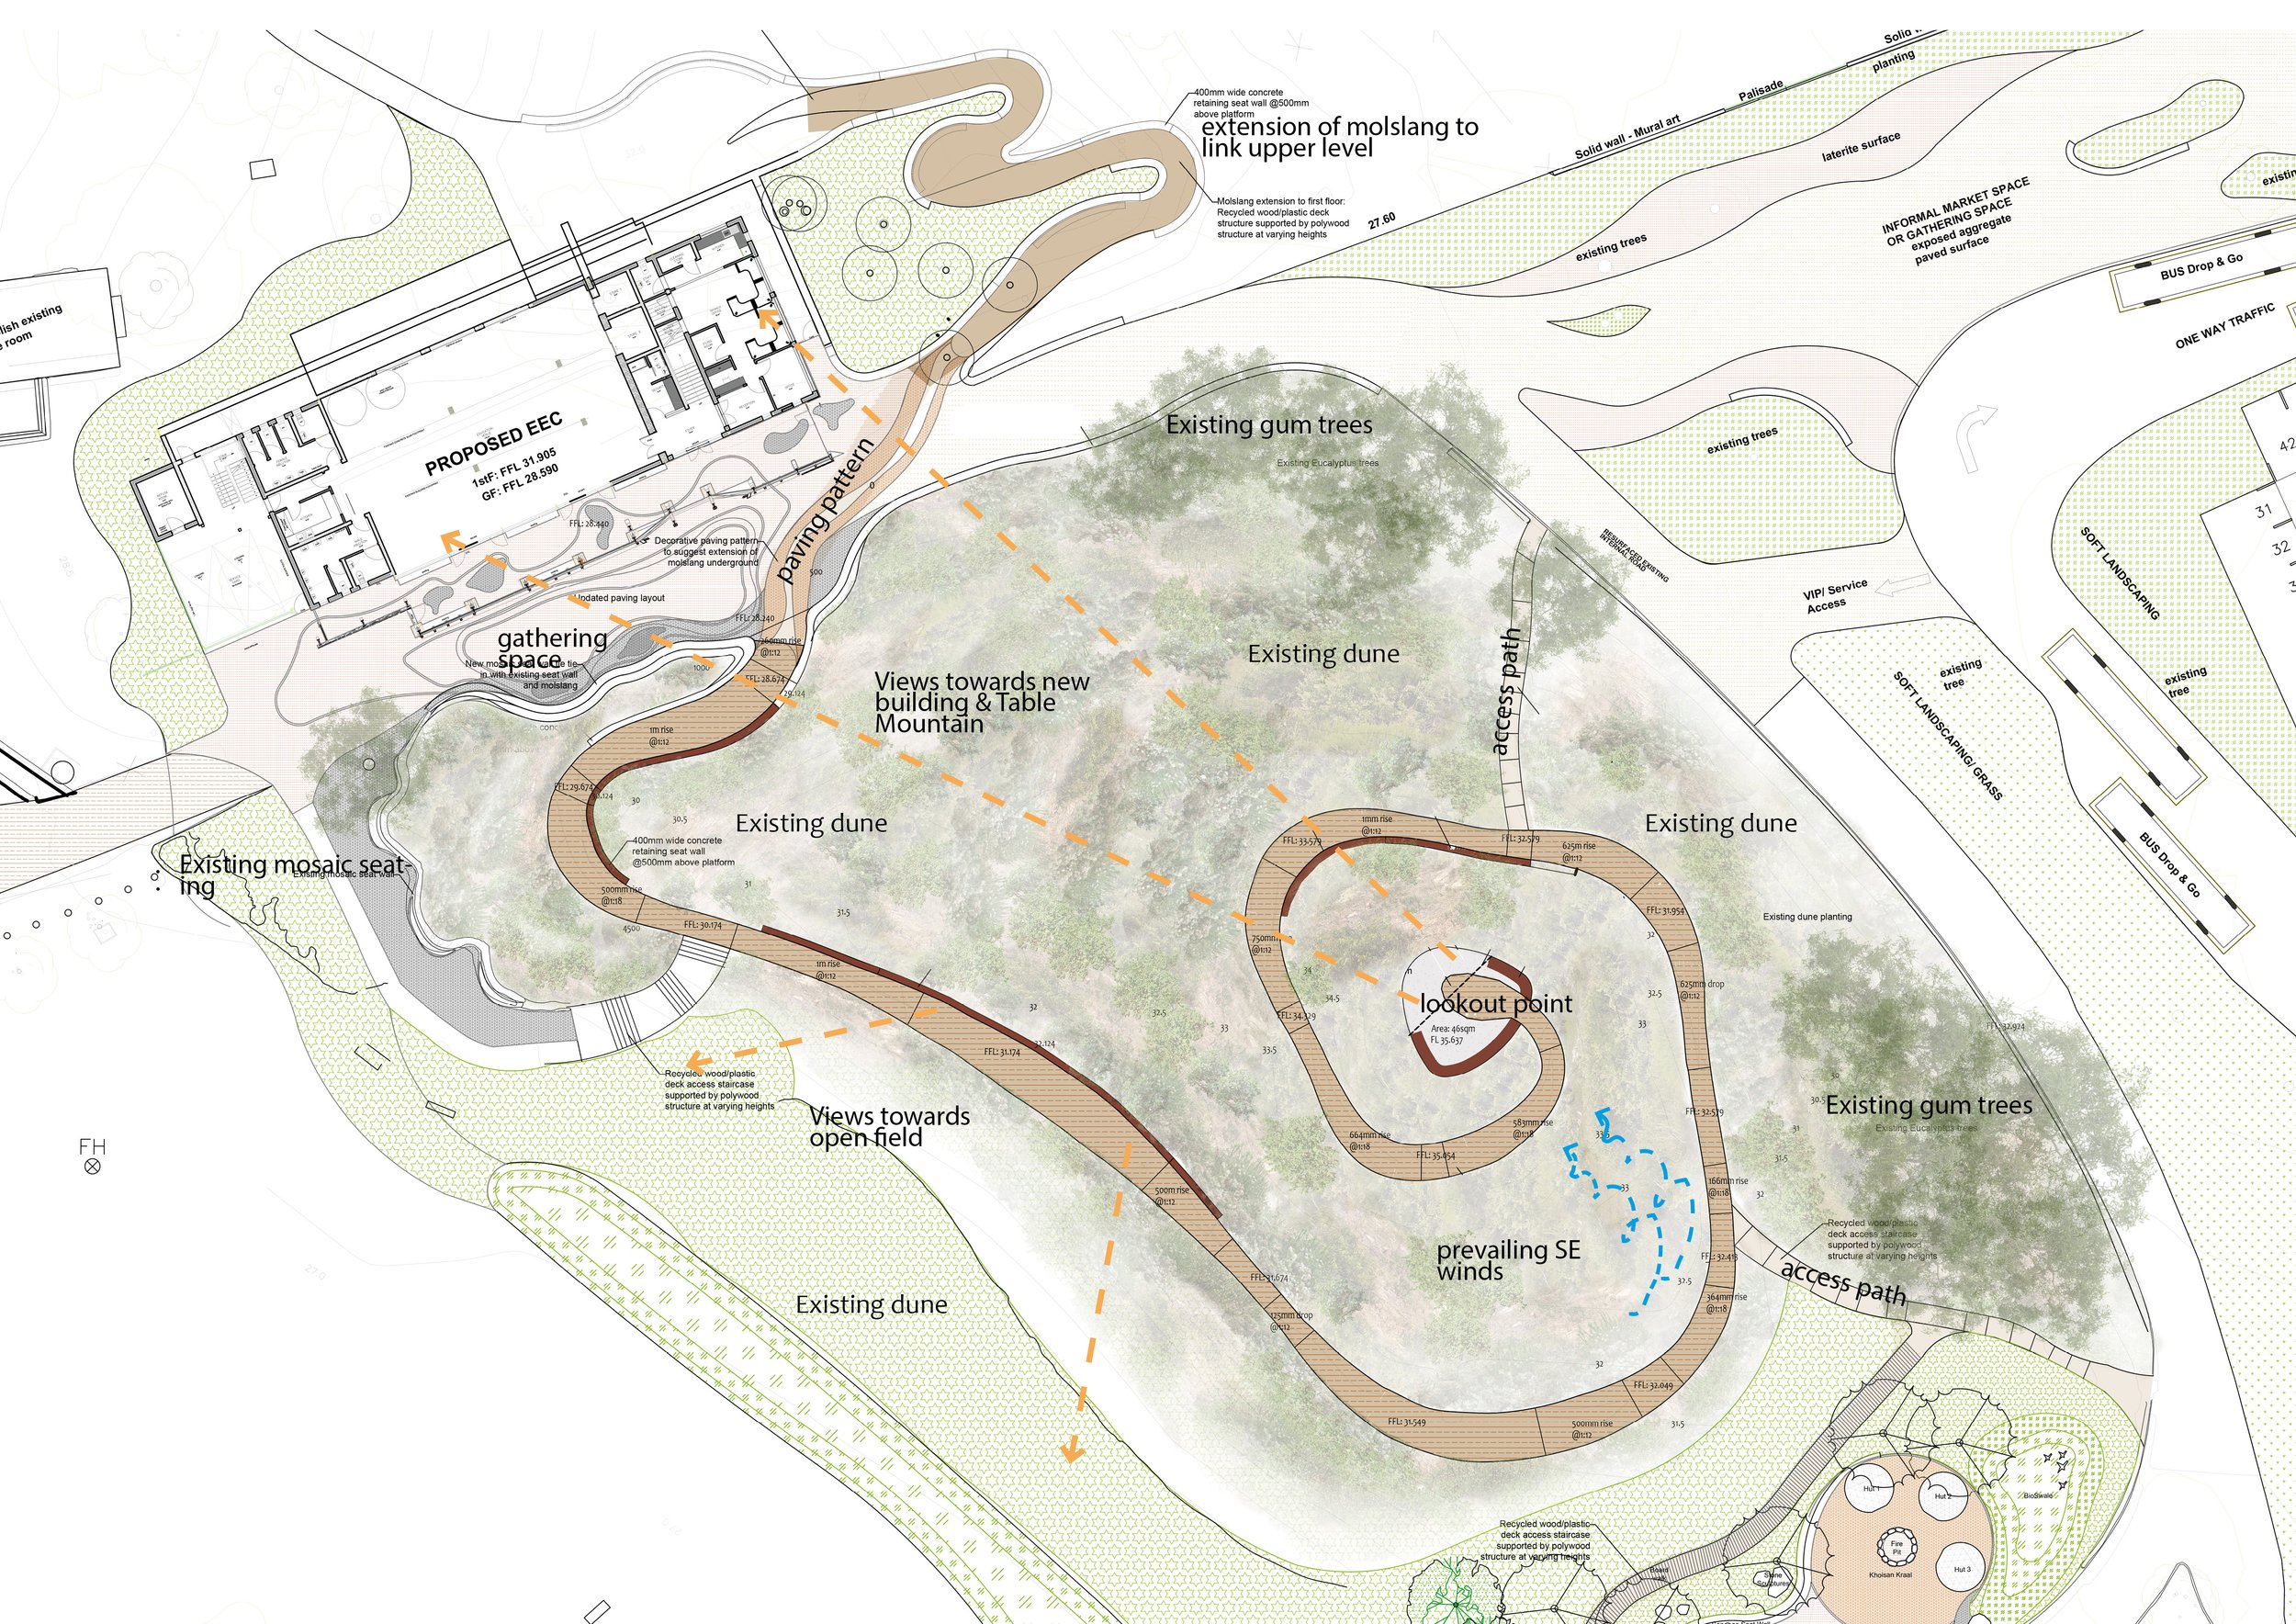  The Molslang Timber Boardwalk, a project currently in its conceptual design phase, will be an addition to Westridge Park in Cape Town as part of the comprehensive Westridge Park upgrade.    A new boardwalk is proposed for the Biodiversity Dune, repl